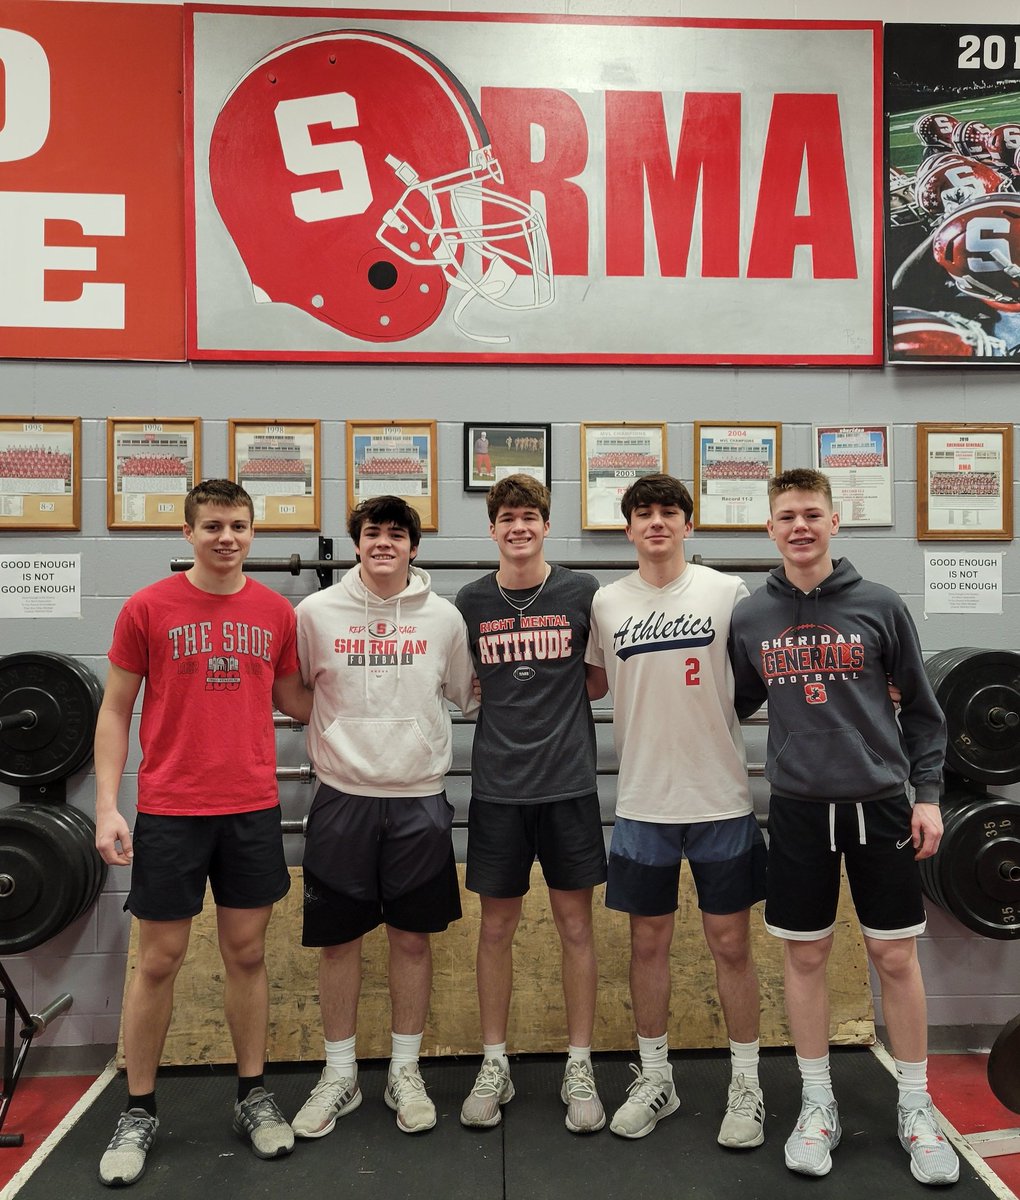 After a 7pm tipoff and a 2.5 HOUR ride home these guys got in bed around midnight (if they were lucky). So who on earth would get up early to come to a 6am EXTRA Lift the next morning? All Five. This is WHY WE ARE WHO WE ARE. We win Championships because our guys are CHAMPIONS.